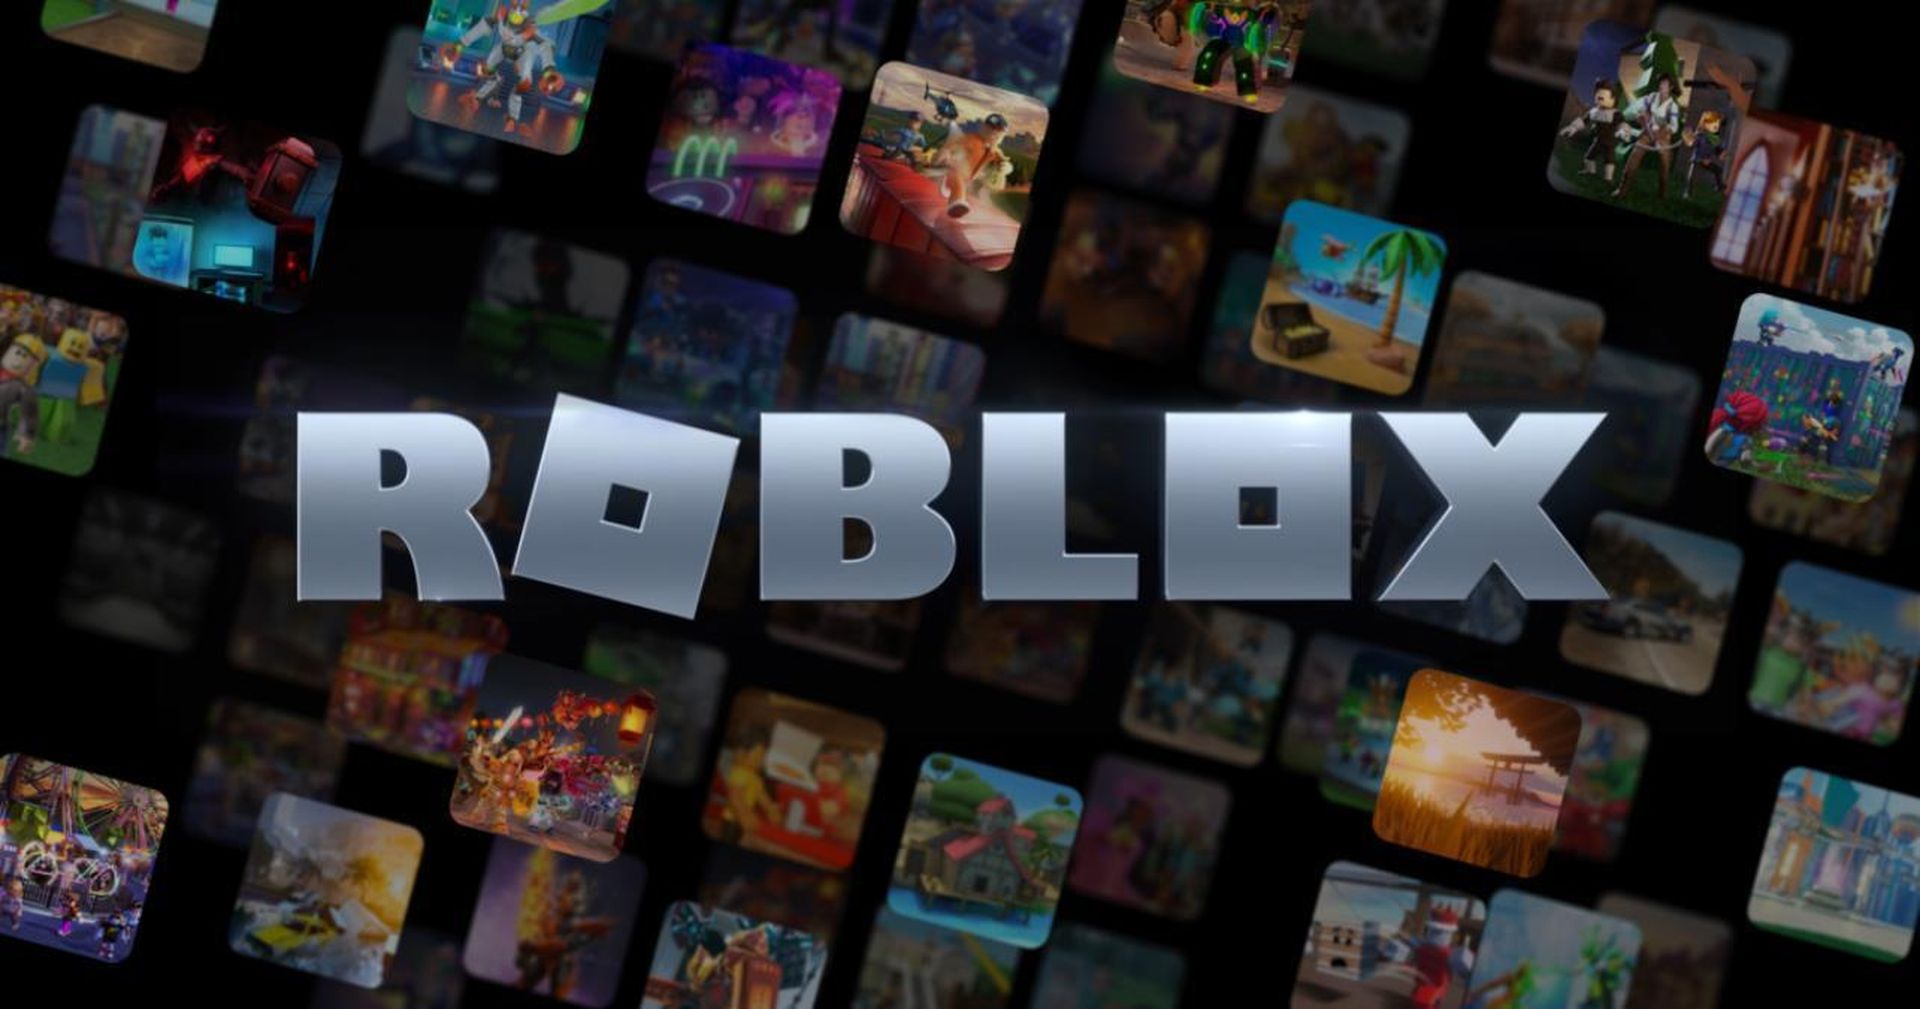 Are you loooking for active codes for Roblox Music? If the answer is yes, you have come to the right place. We are here to share the best song ID's for Roblox.